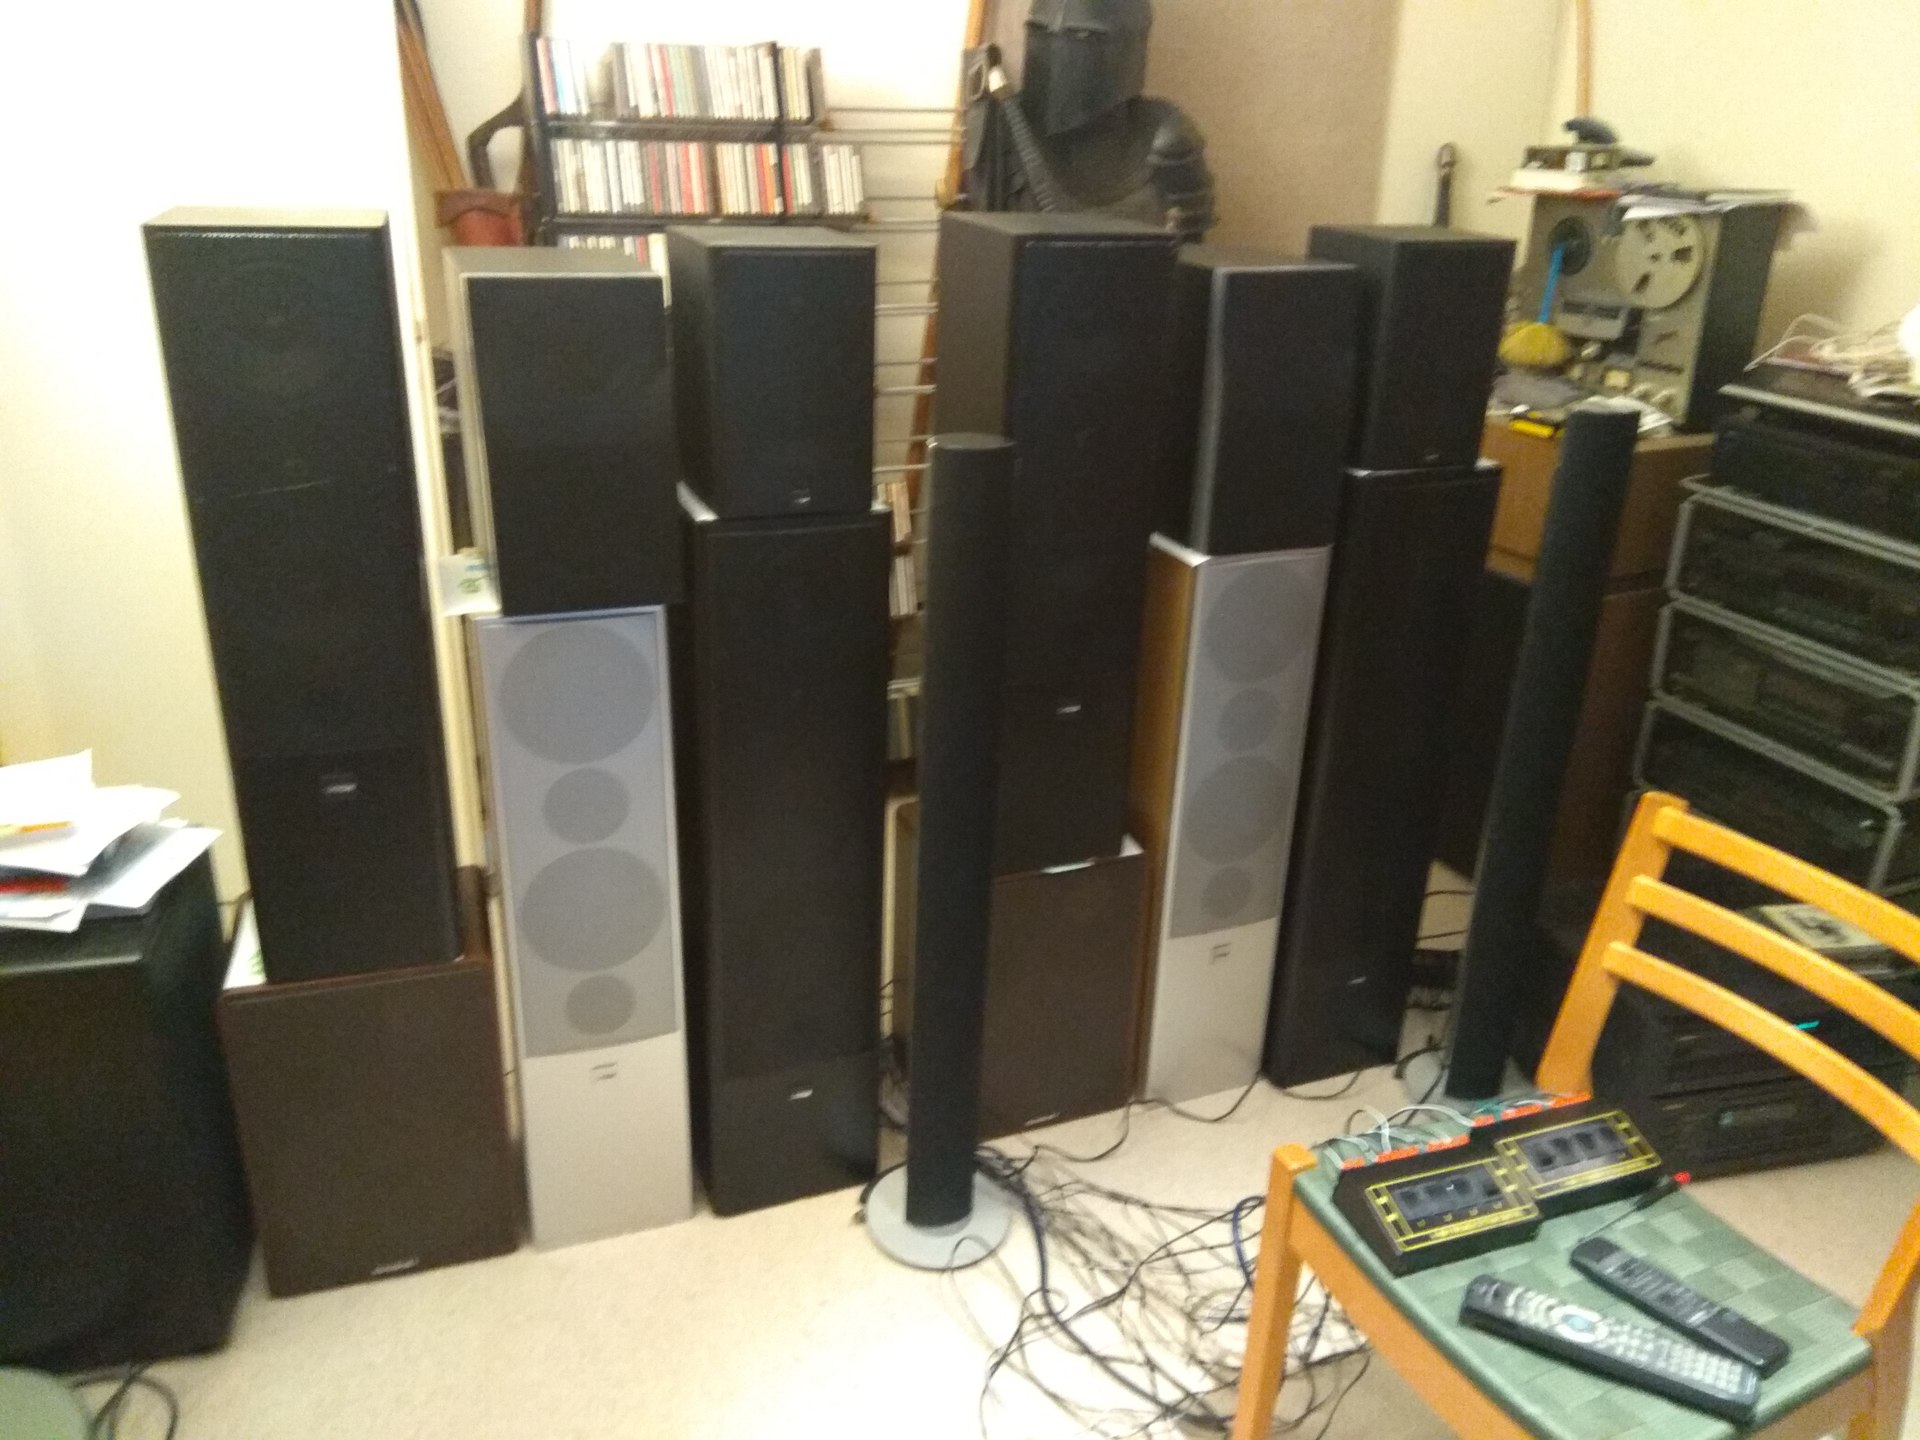 wall-of-sound-beolab-beovox-canton-corelli-denon-fonum-kef-legend-of-offtopic